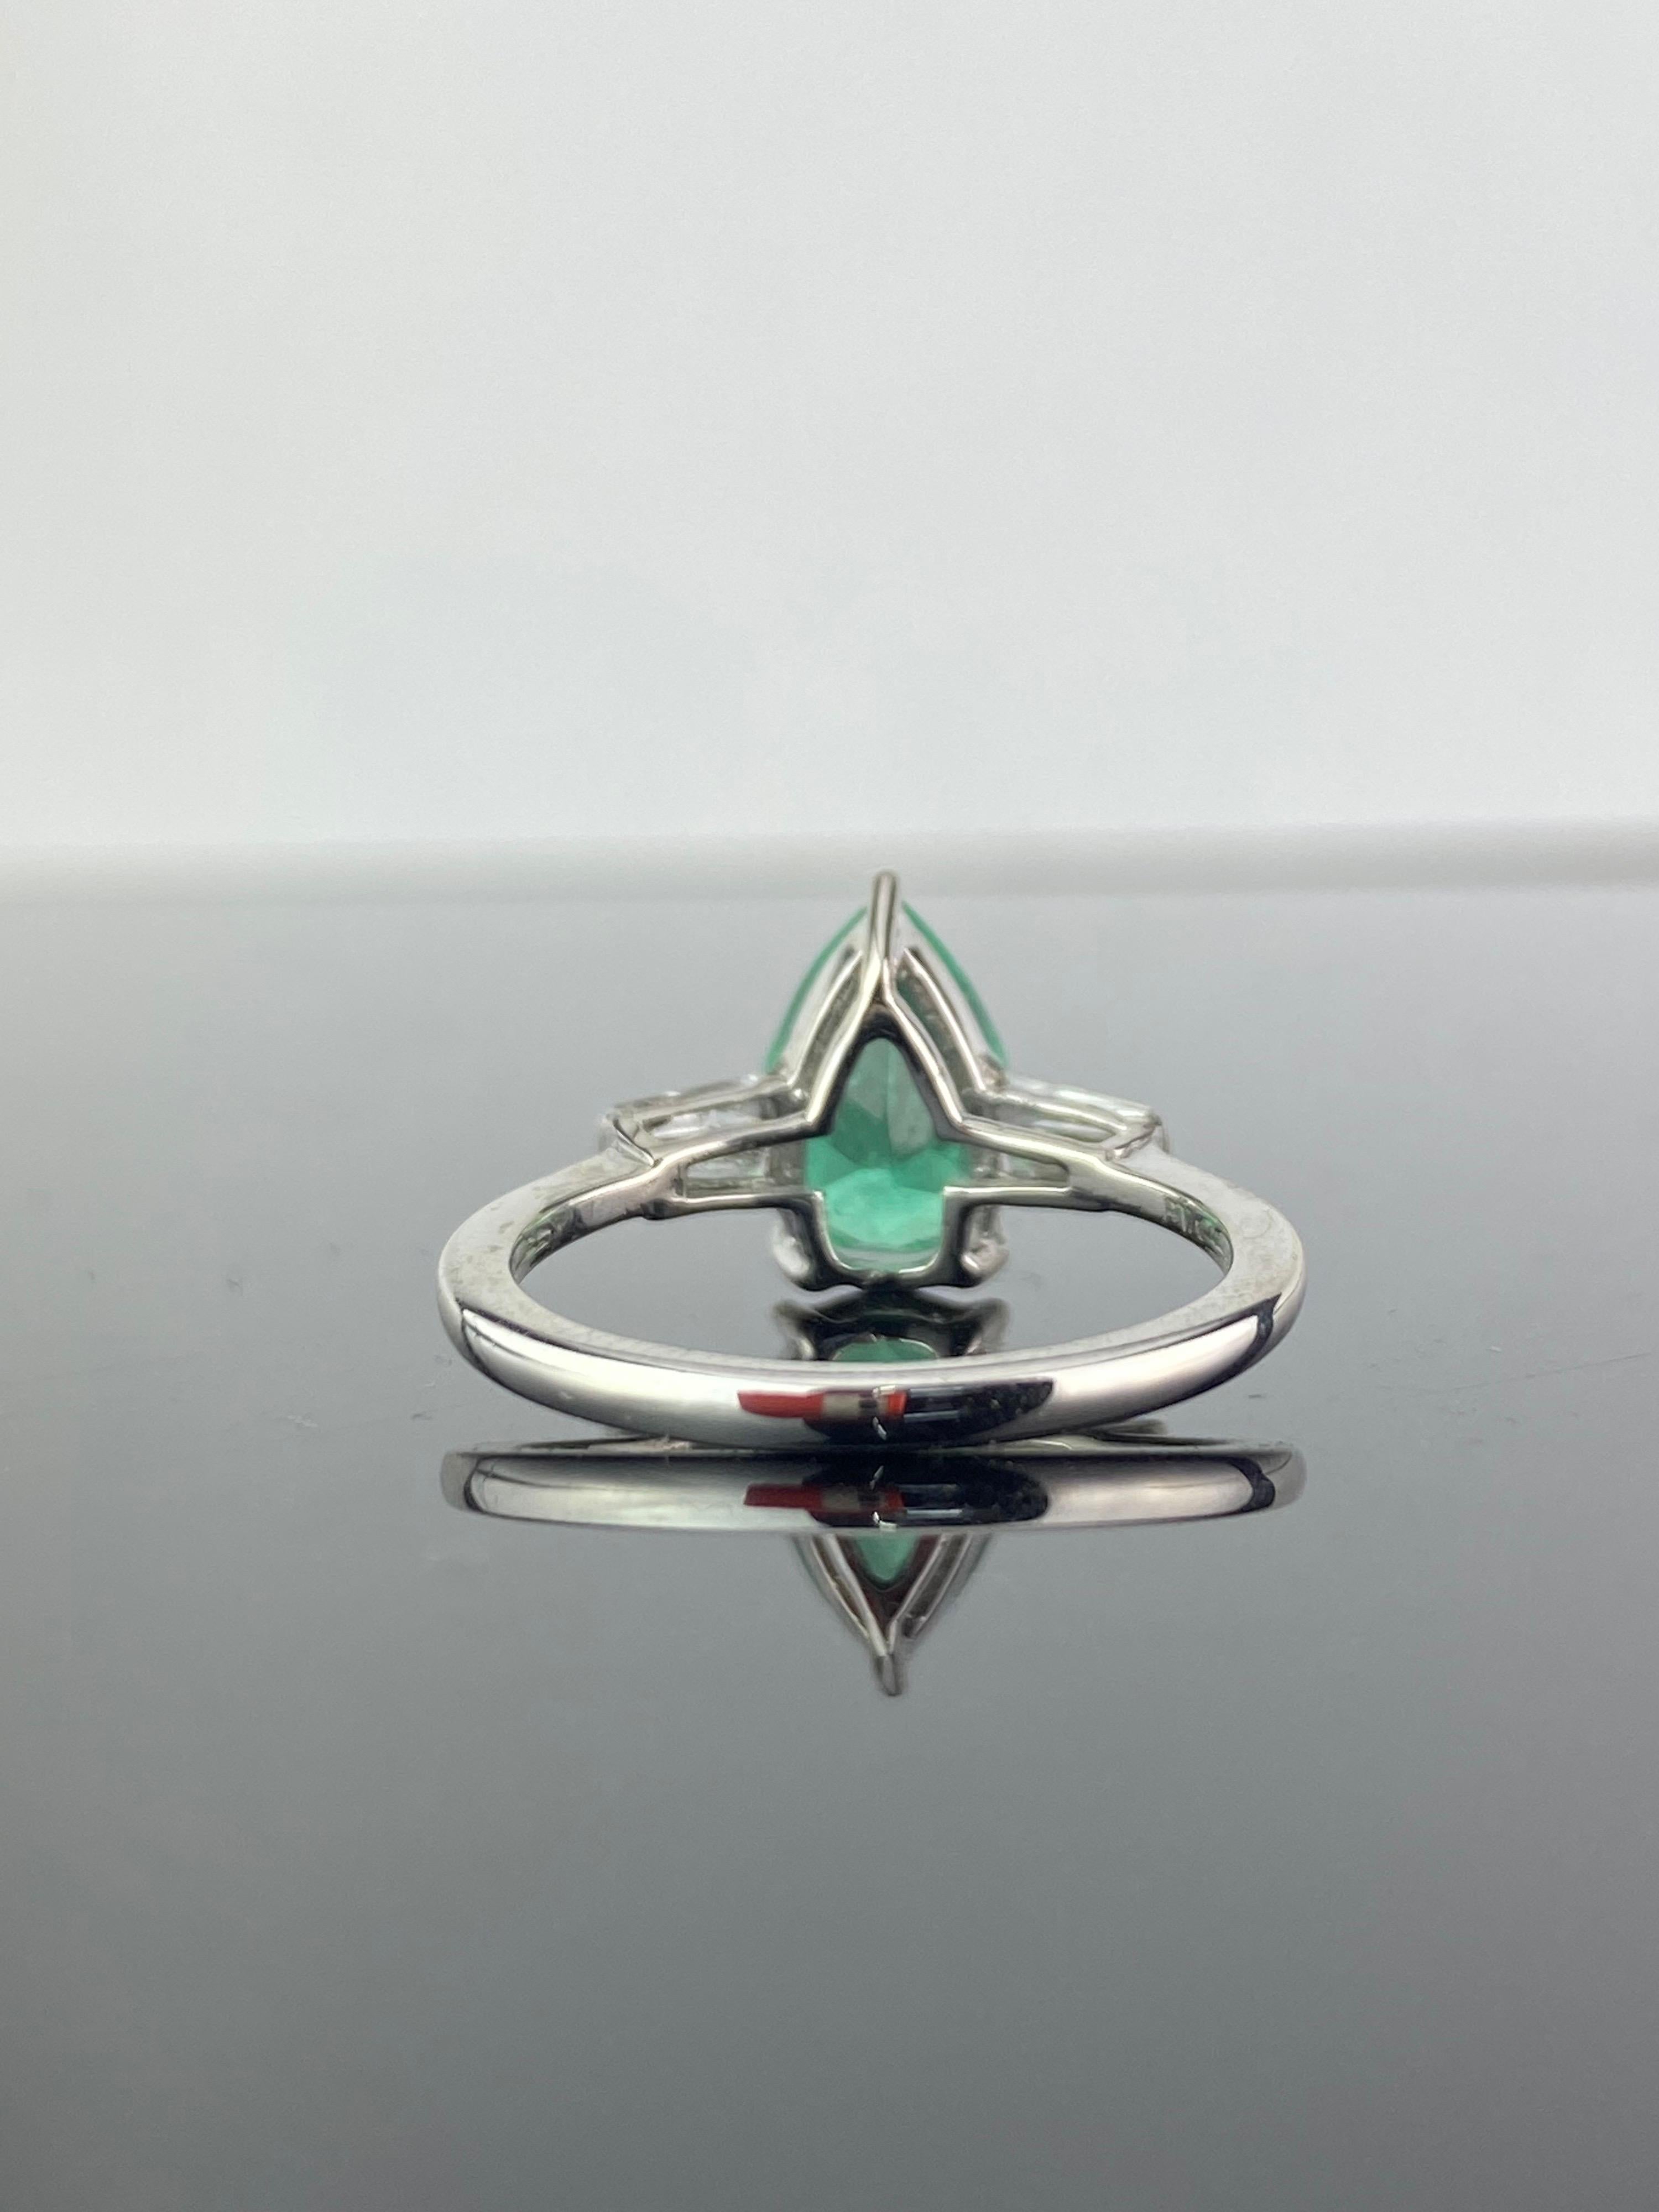 A beautiful, versatile, 0.83 carat natural Colombian Emerald and 0.2 carat Diamond baguette three-stone engagement ring, set in Platinum. Currently sized at US 6, can be resized. 